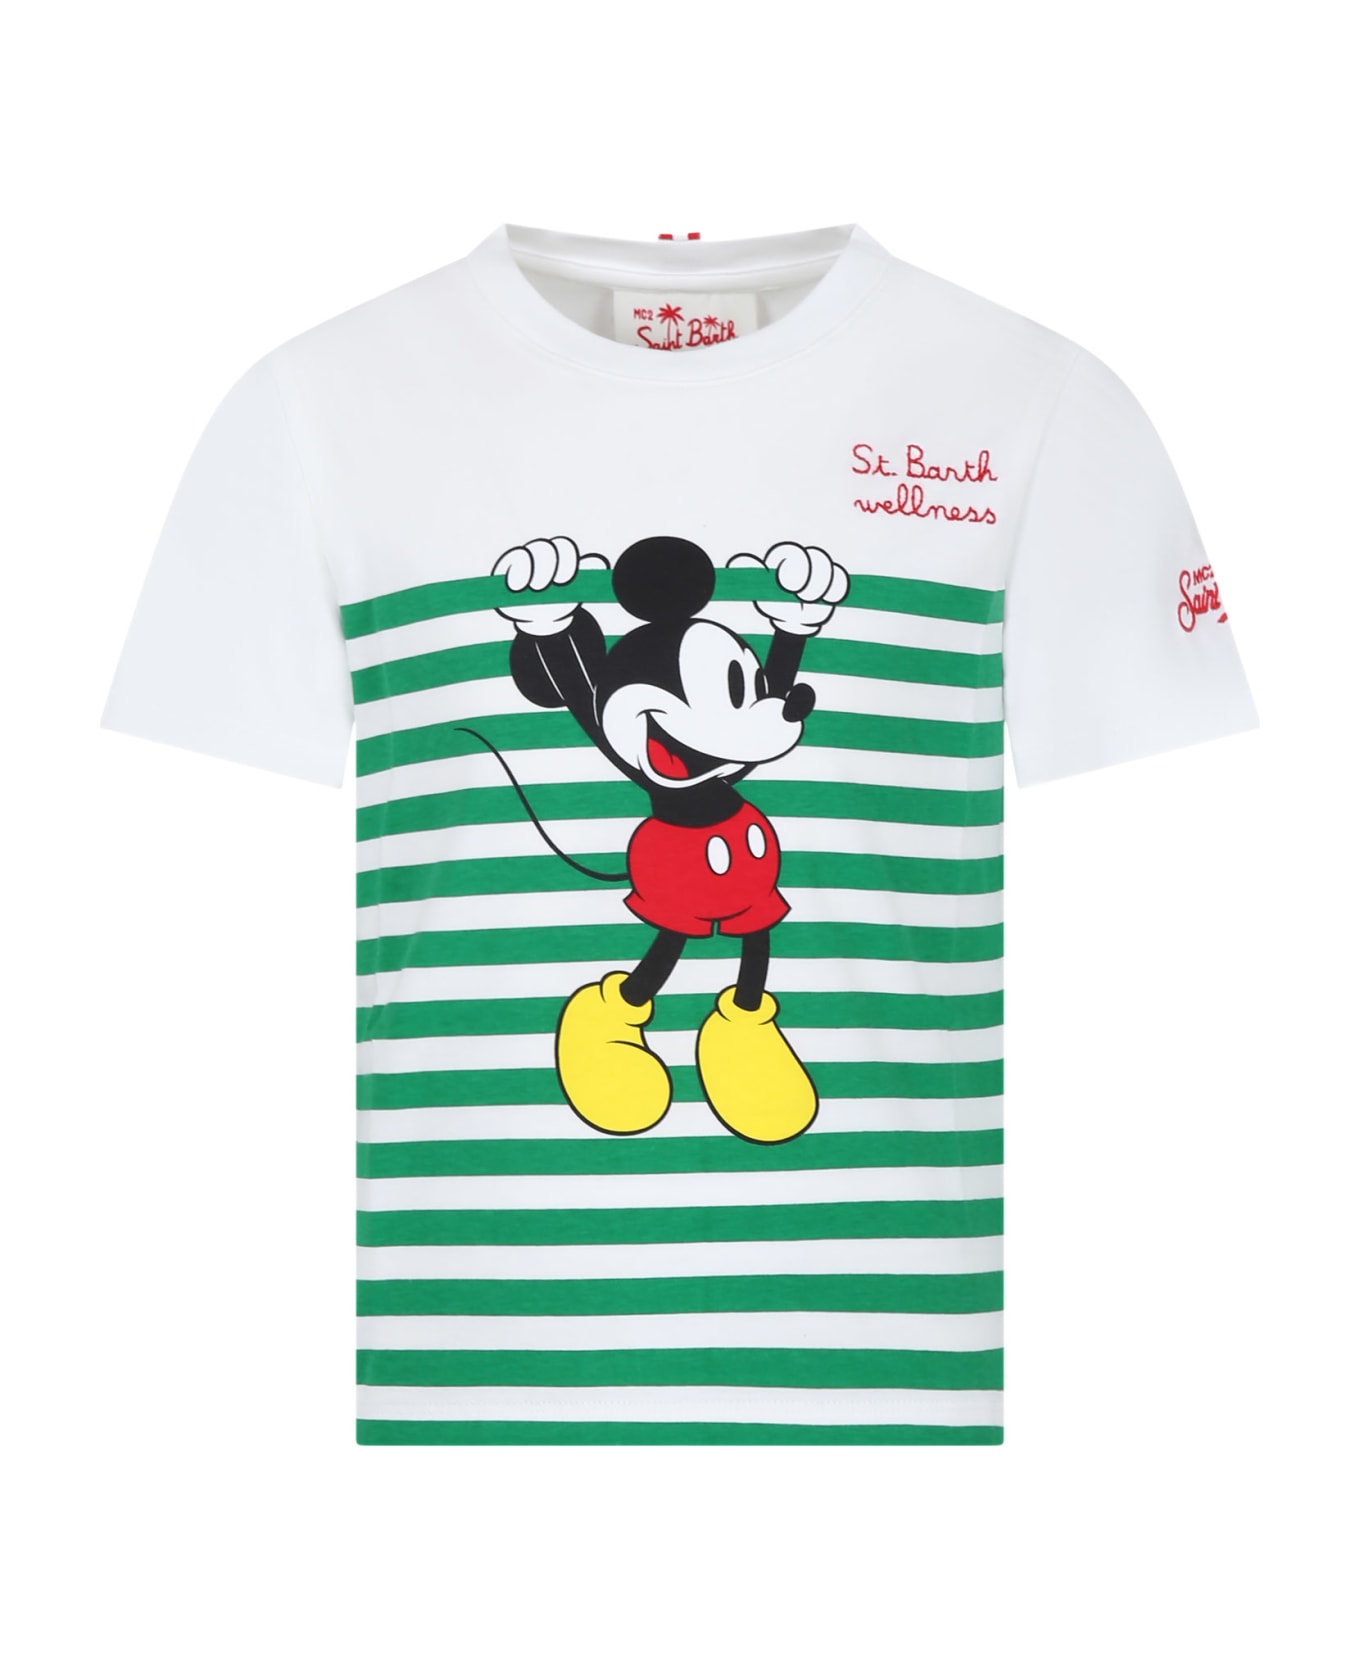 MC2 Saint Barth White T-shirt For Boy With Mickey Mouse - White